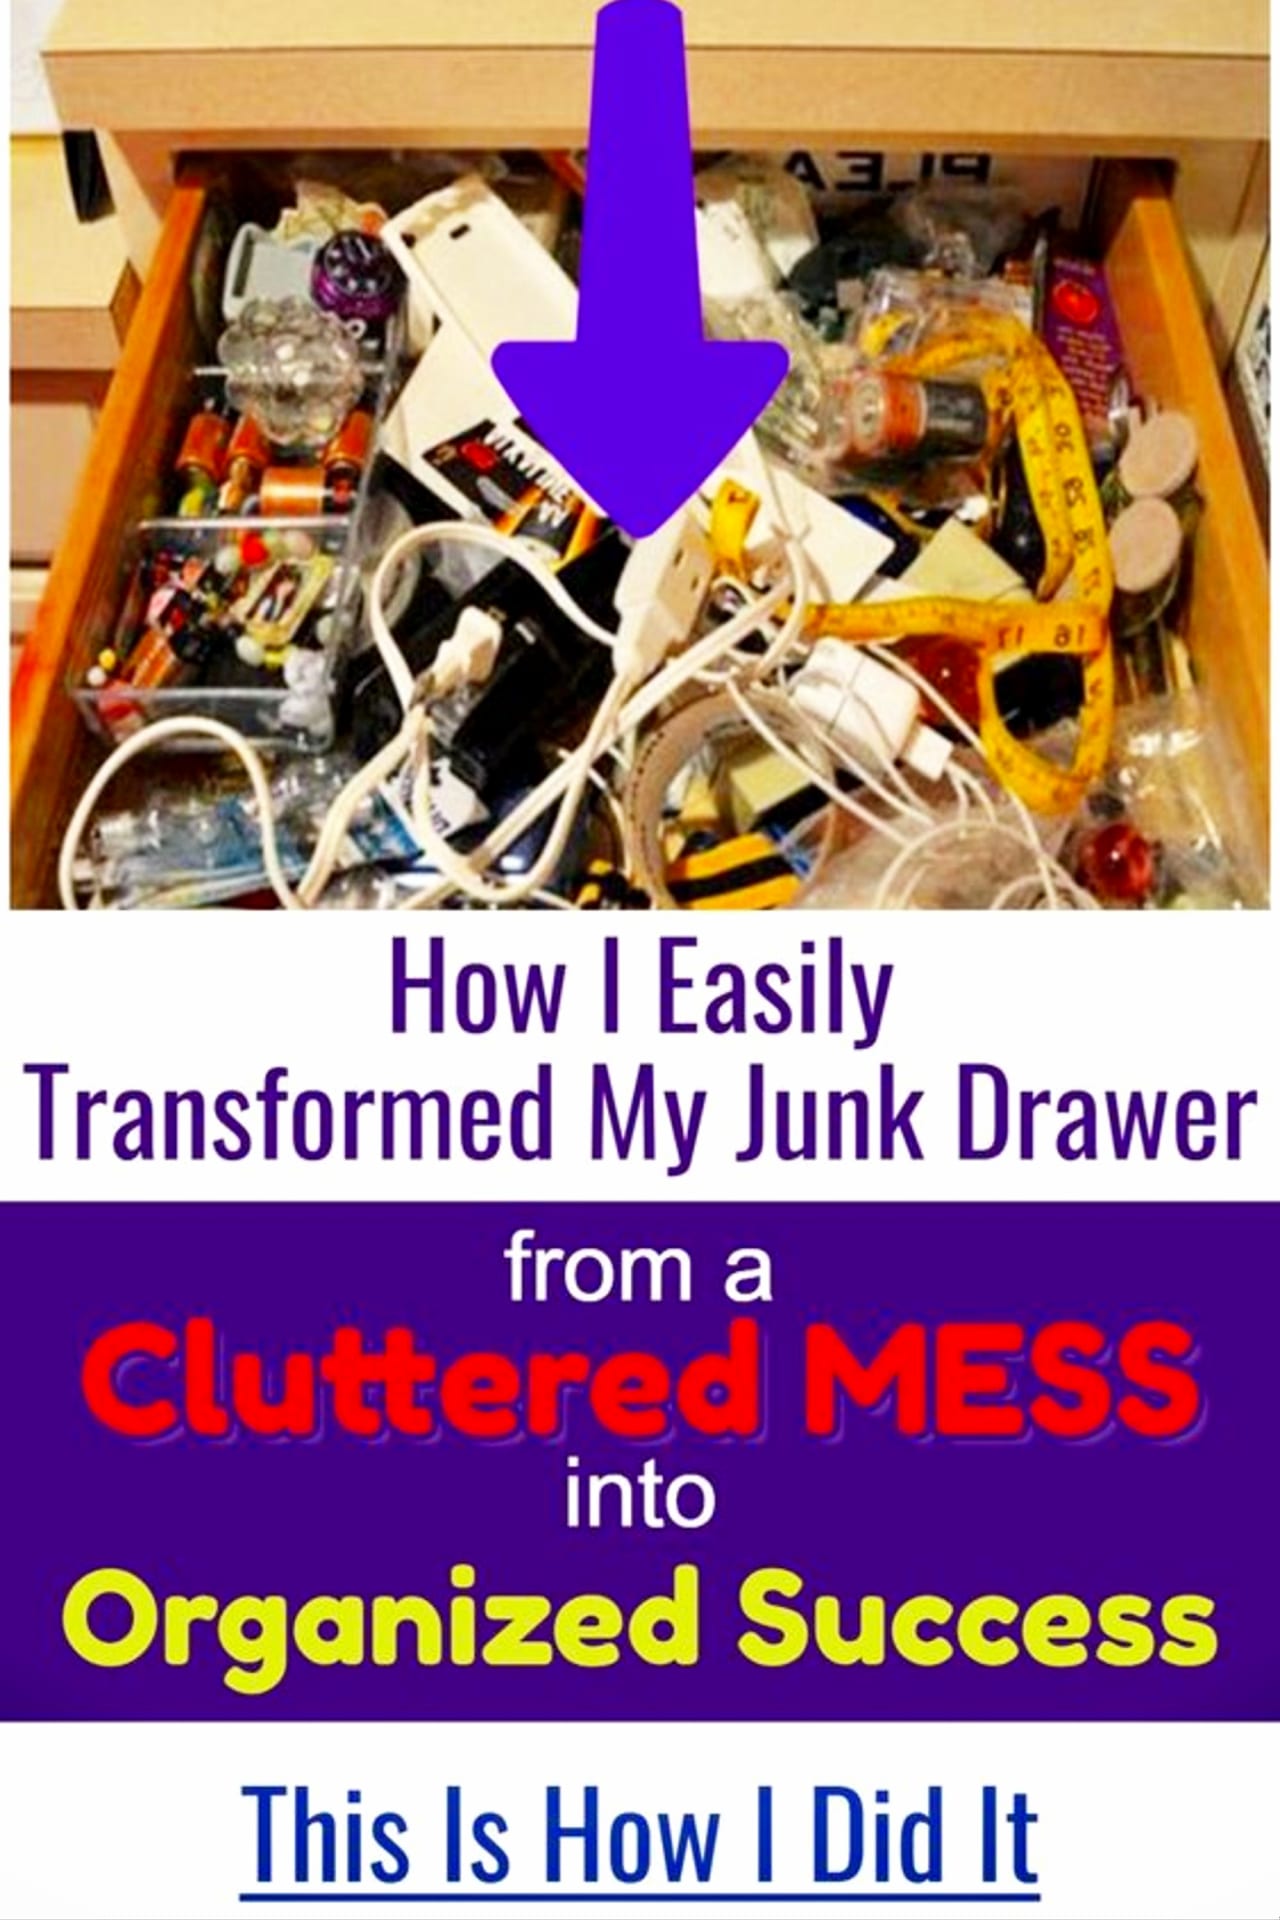 kitchen clutter solutions - declutter kitchen cabinets and drawers and organize your junk drawer on a budget